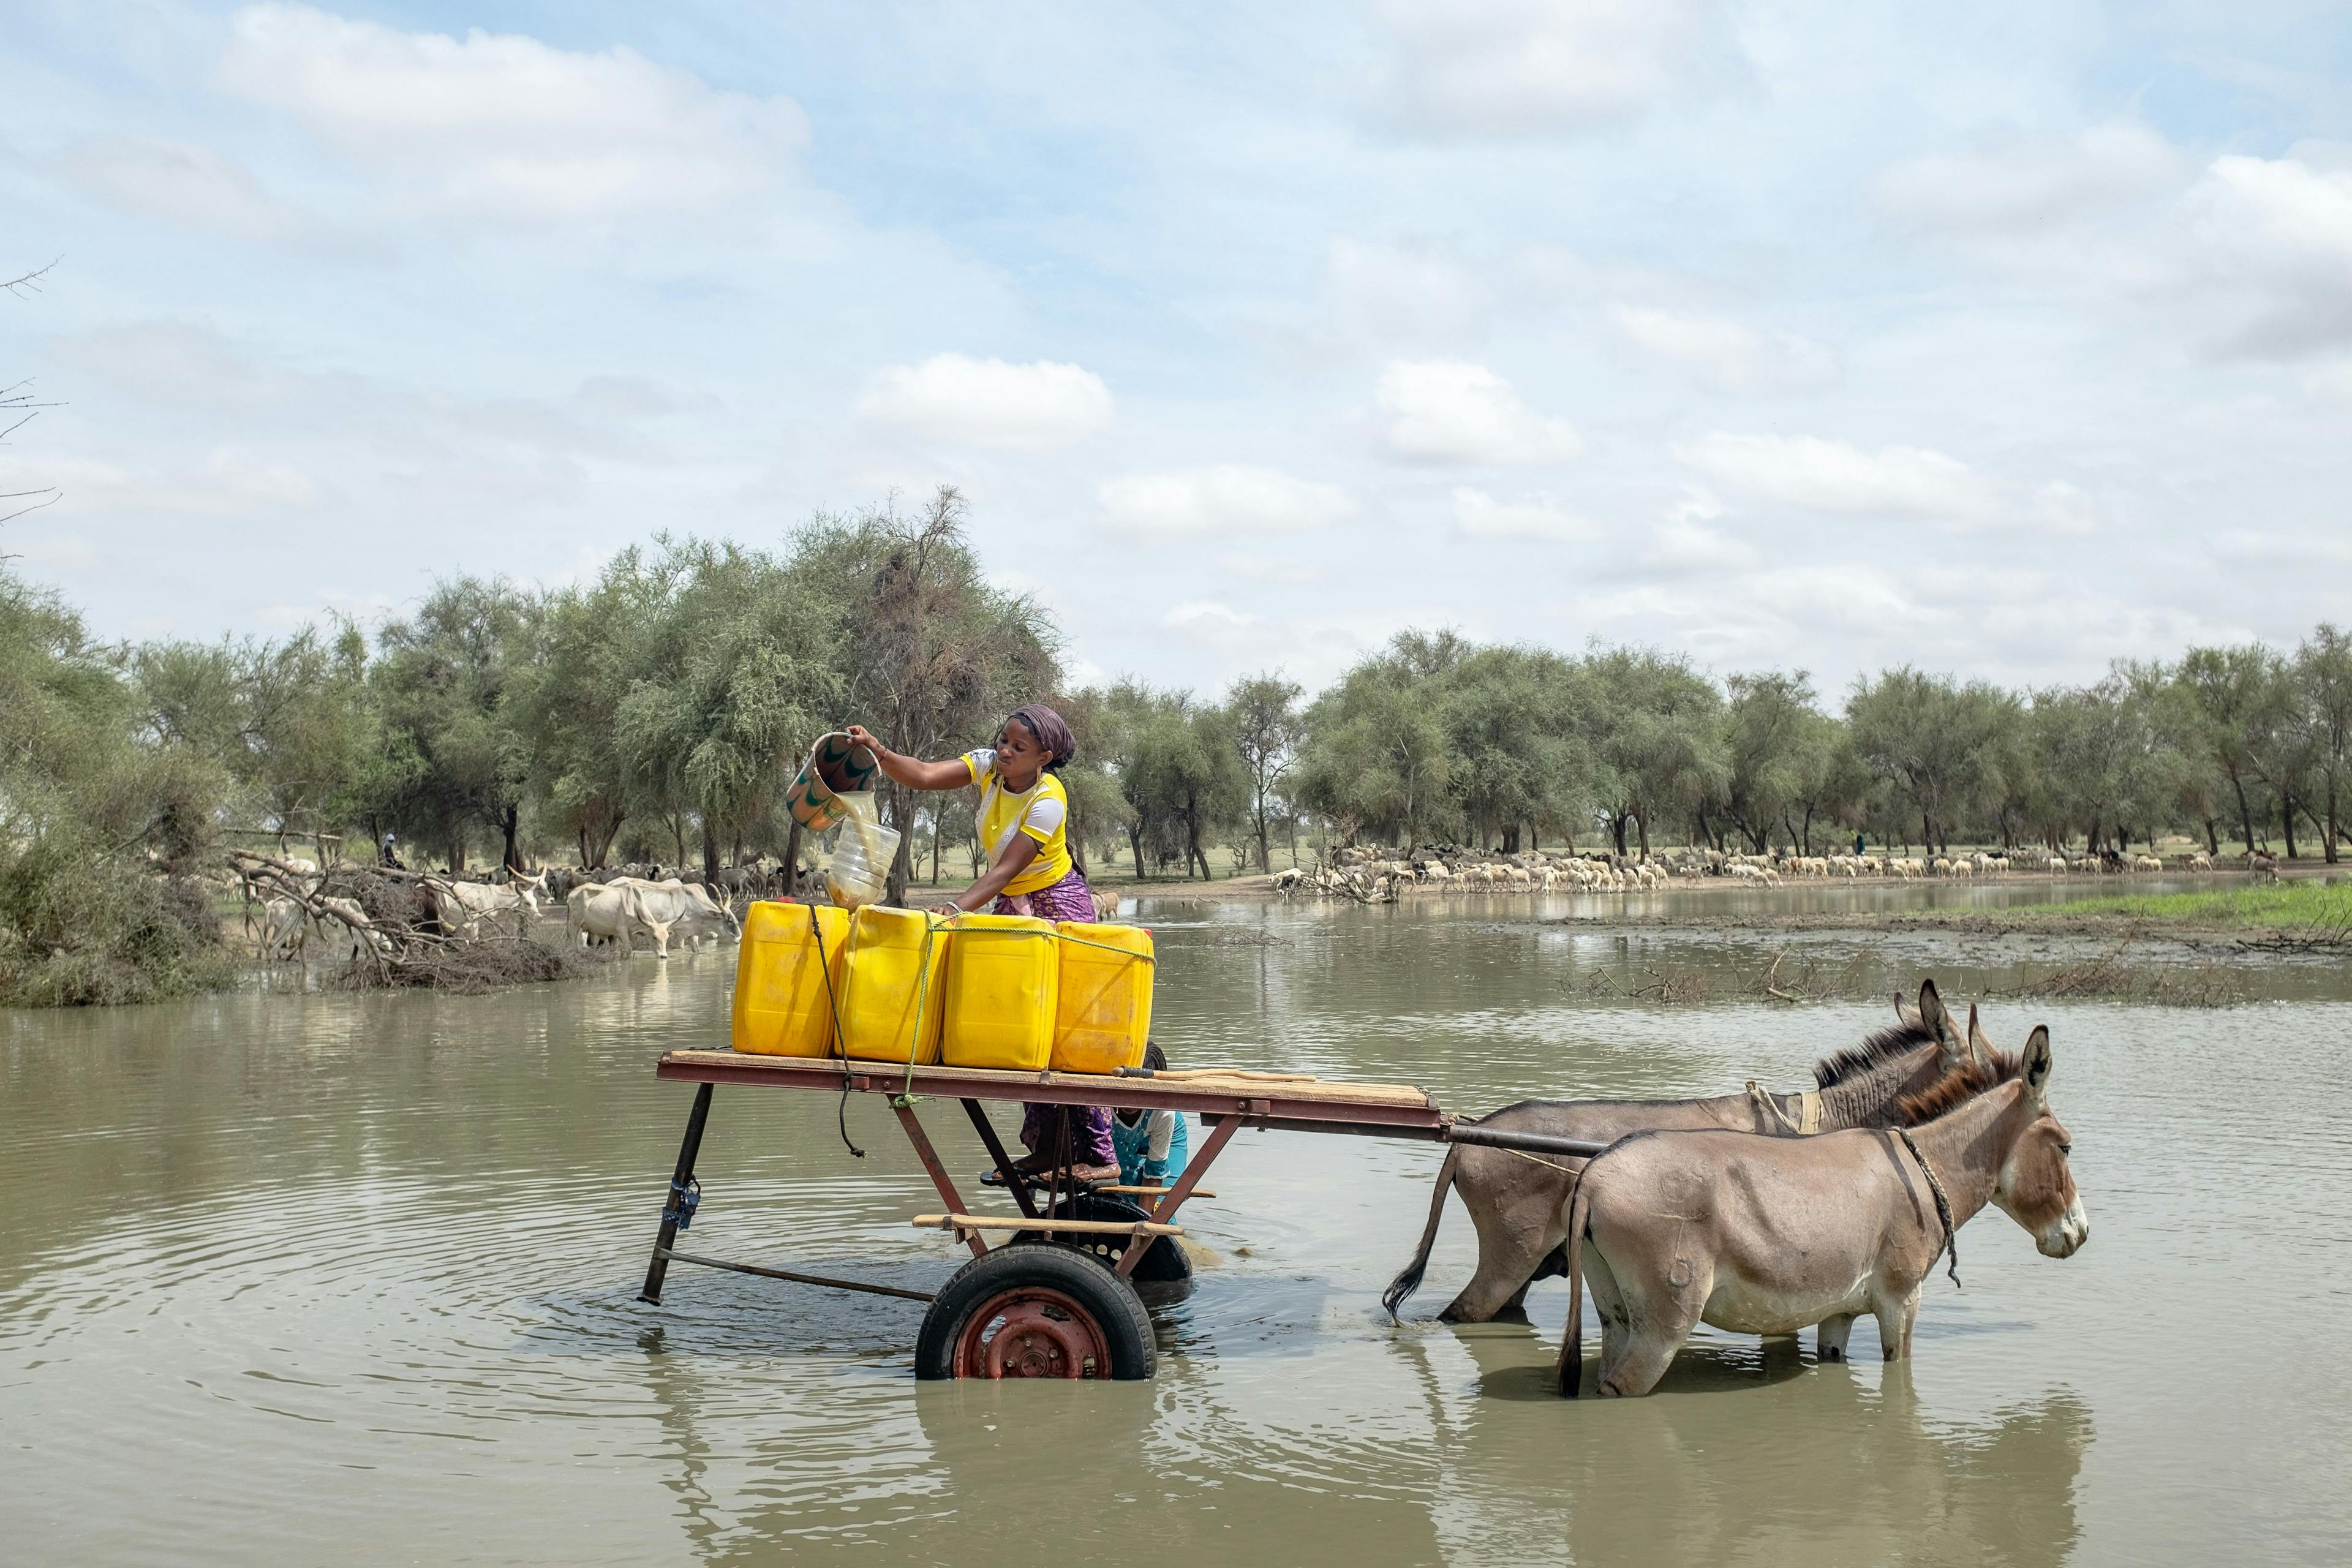 Collecting water and firewood is the women’s task in many African herding communities, while men tend to the animals. For Fulani women in northern Senegal, it could mean travelling increasingly longer distances as the environment degrades. 